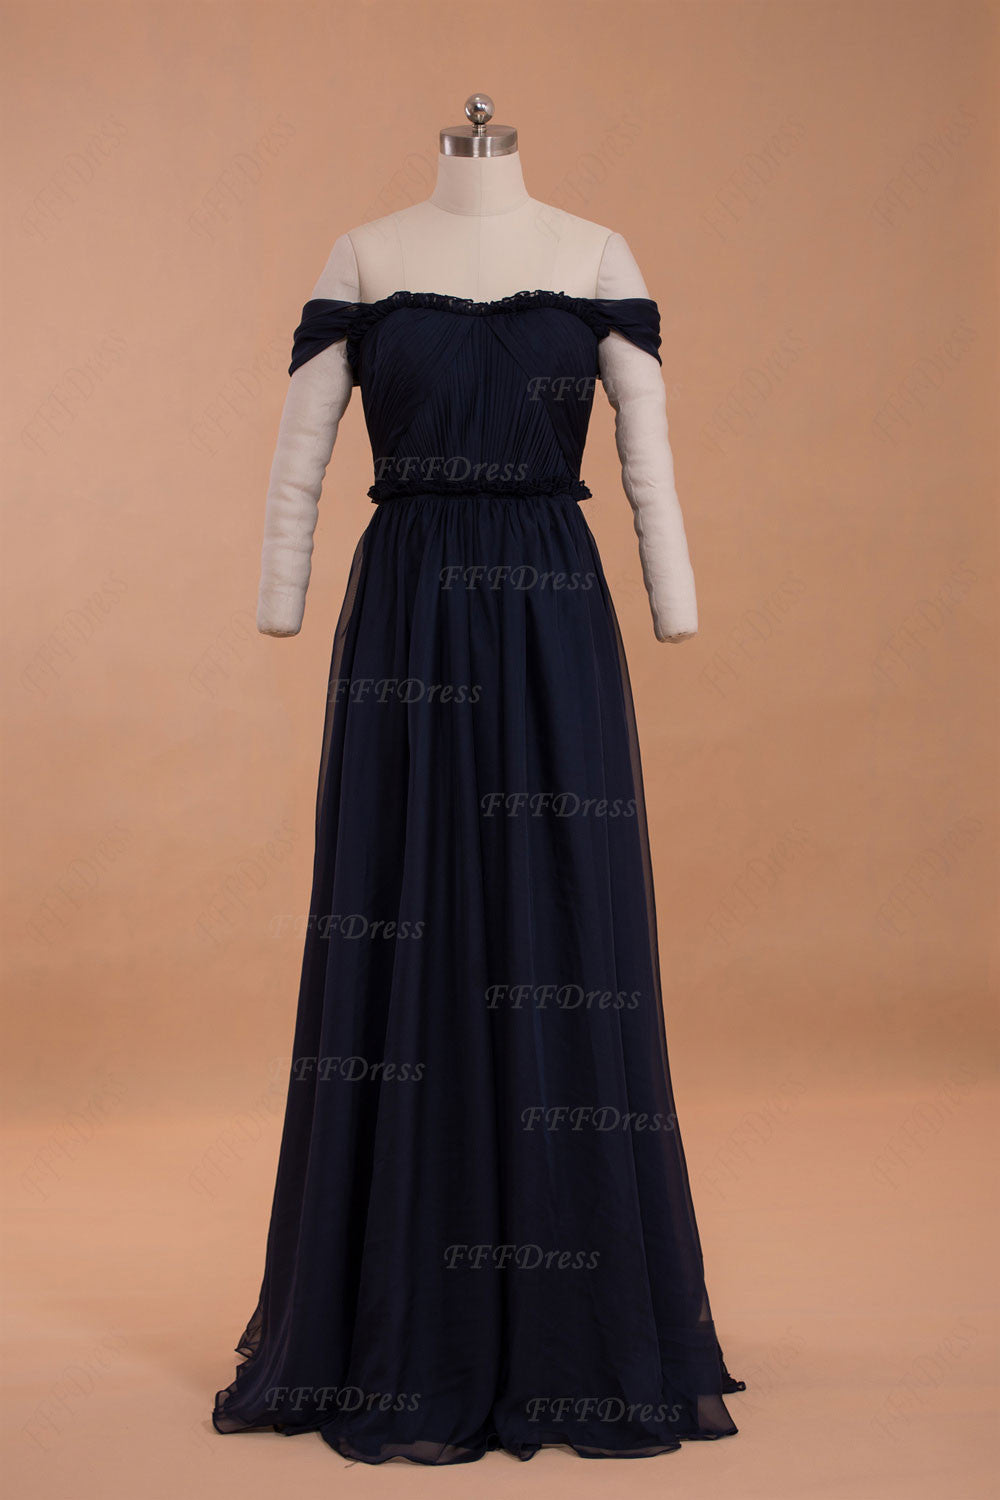 Dark navy blue off the shoulder prom dresses formal dresses with ruffles